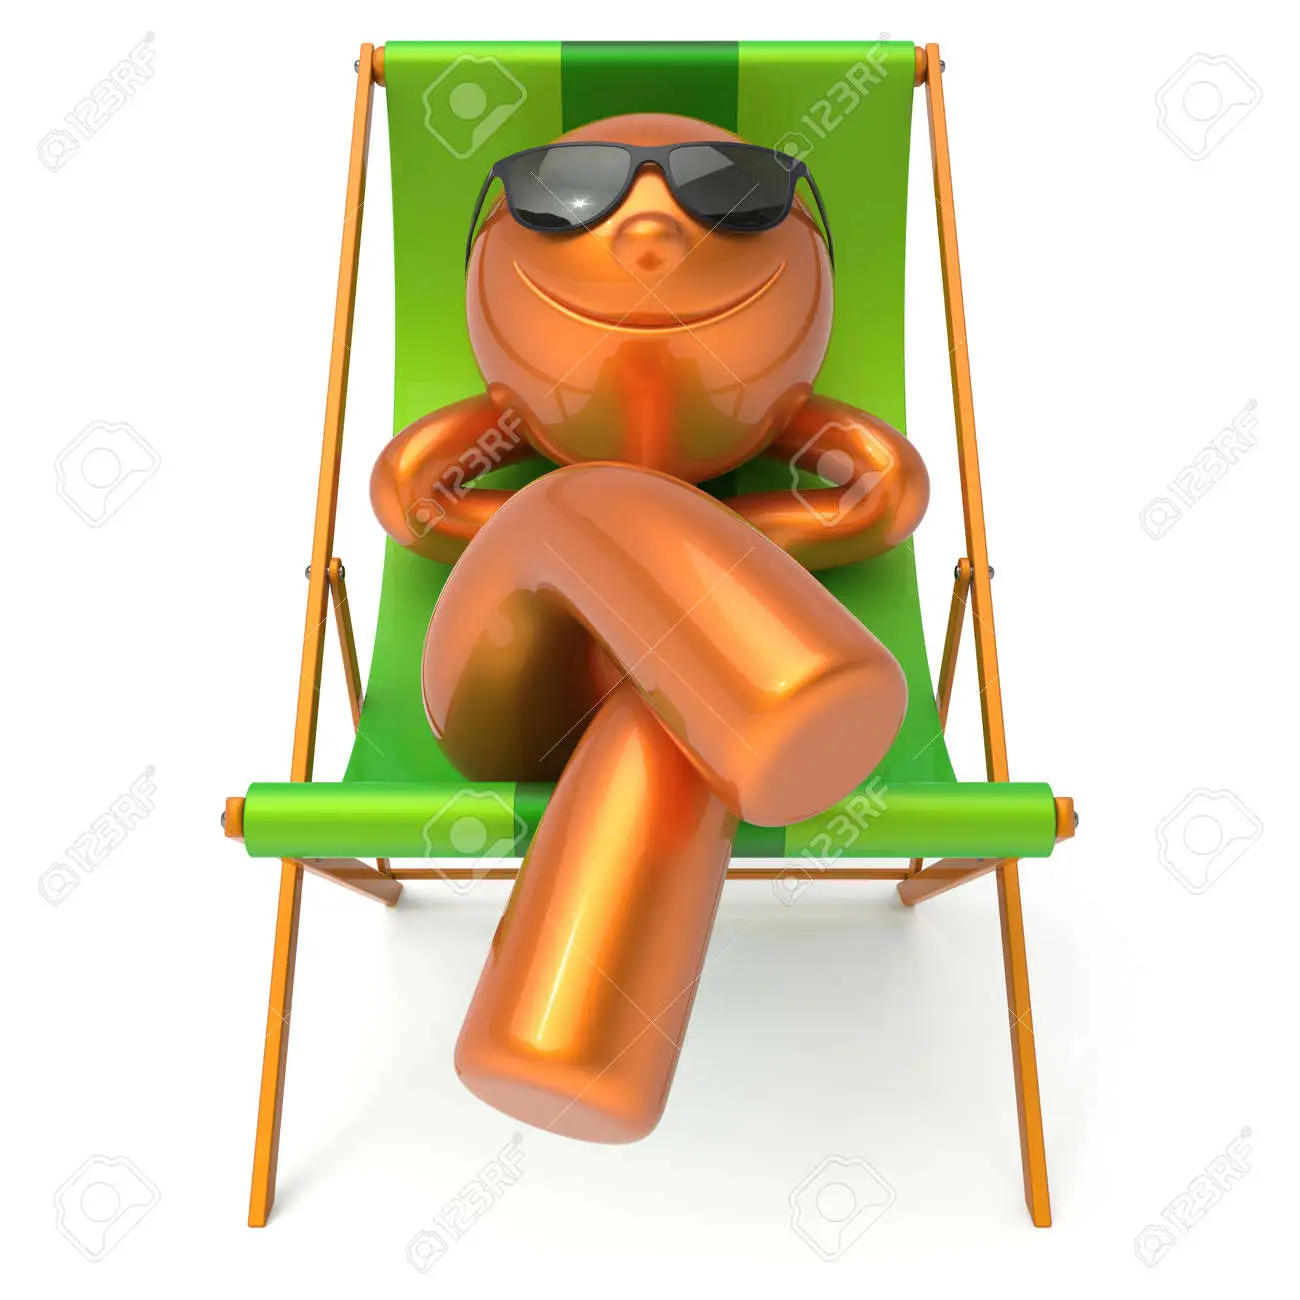 Man smiling beach deck chair sunglasses relaxing summer cartoon character chilling stylized person sun lounger tourist have fun sunbathe rest outdoor vacation lifestyle travel destination d render stock photo picture and royalty